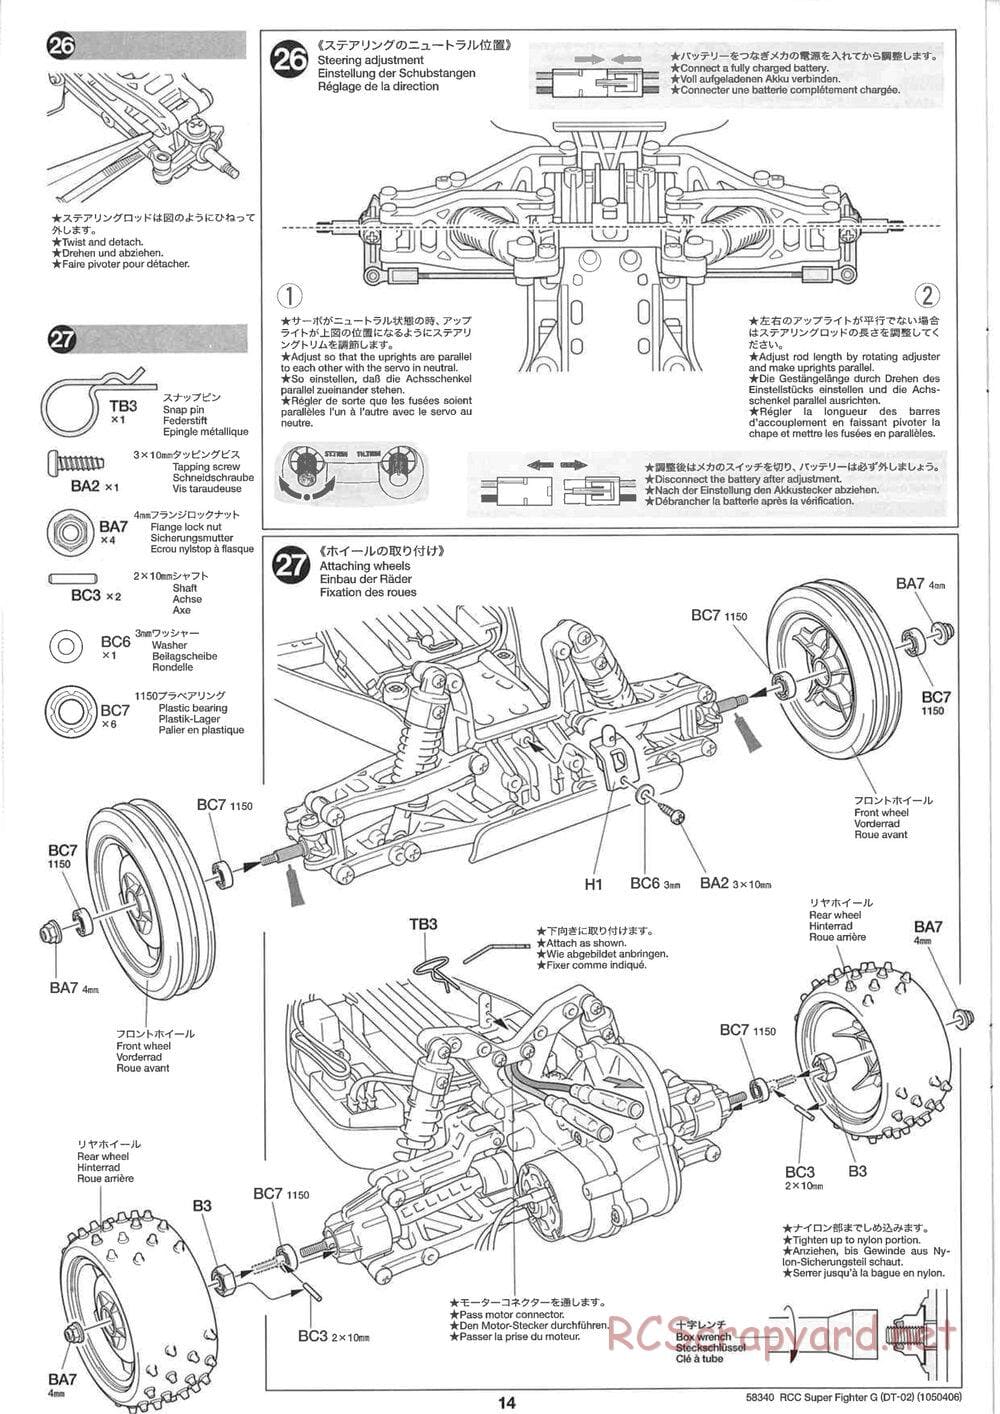 Tamiya - Super Fighter G Chassis - Manual - Page 14